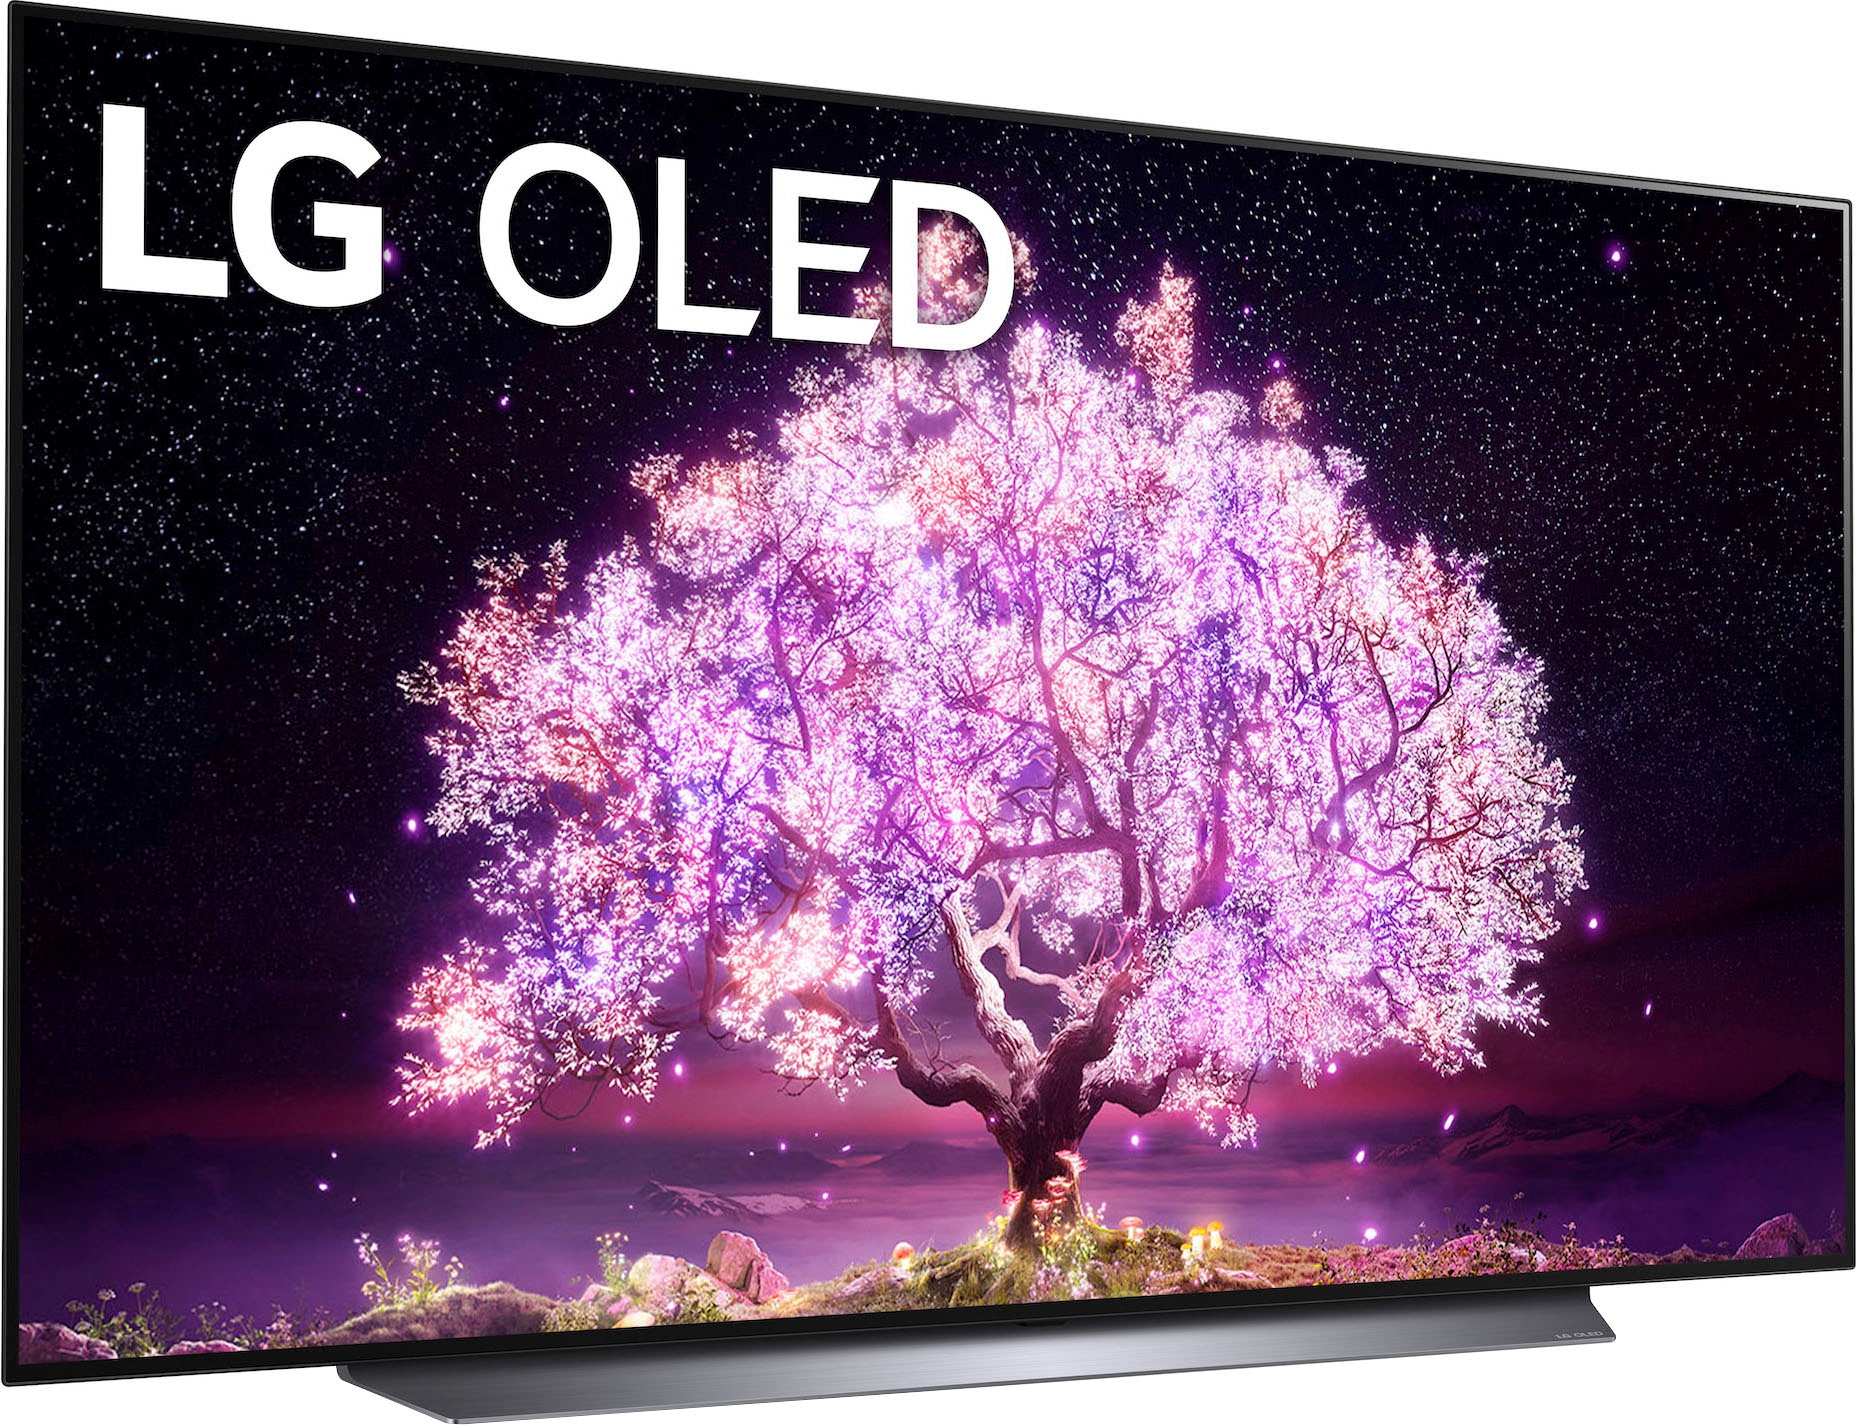 Vision LG OLED-Fernseher OTTO bei ,α9 Atmos 4K OLED Ultra & cm/77 Gen4 kaufen »OLED77C17LB«, HD, jetzt Zoll, AI-Prozessor,Dolby Dolby 4K Smart-TV, 195